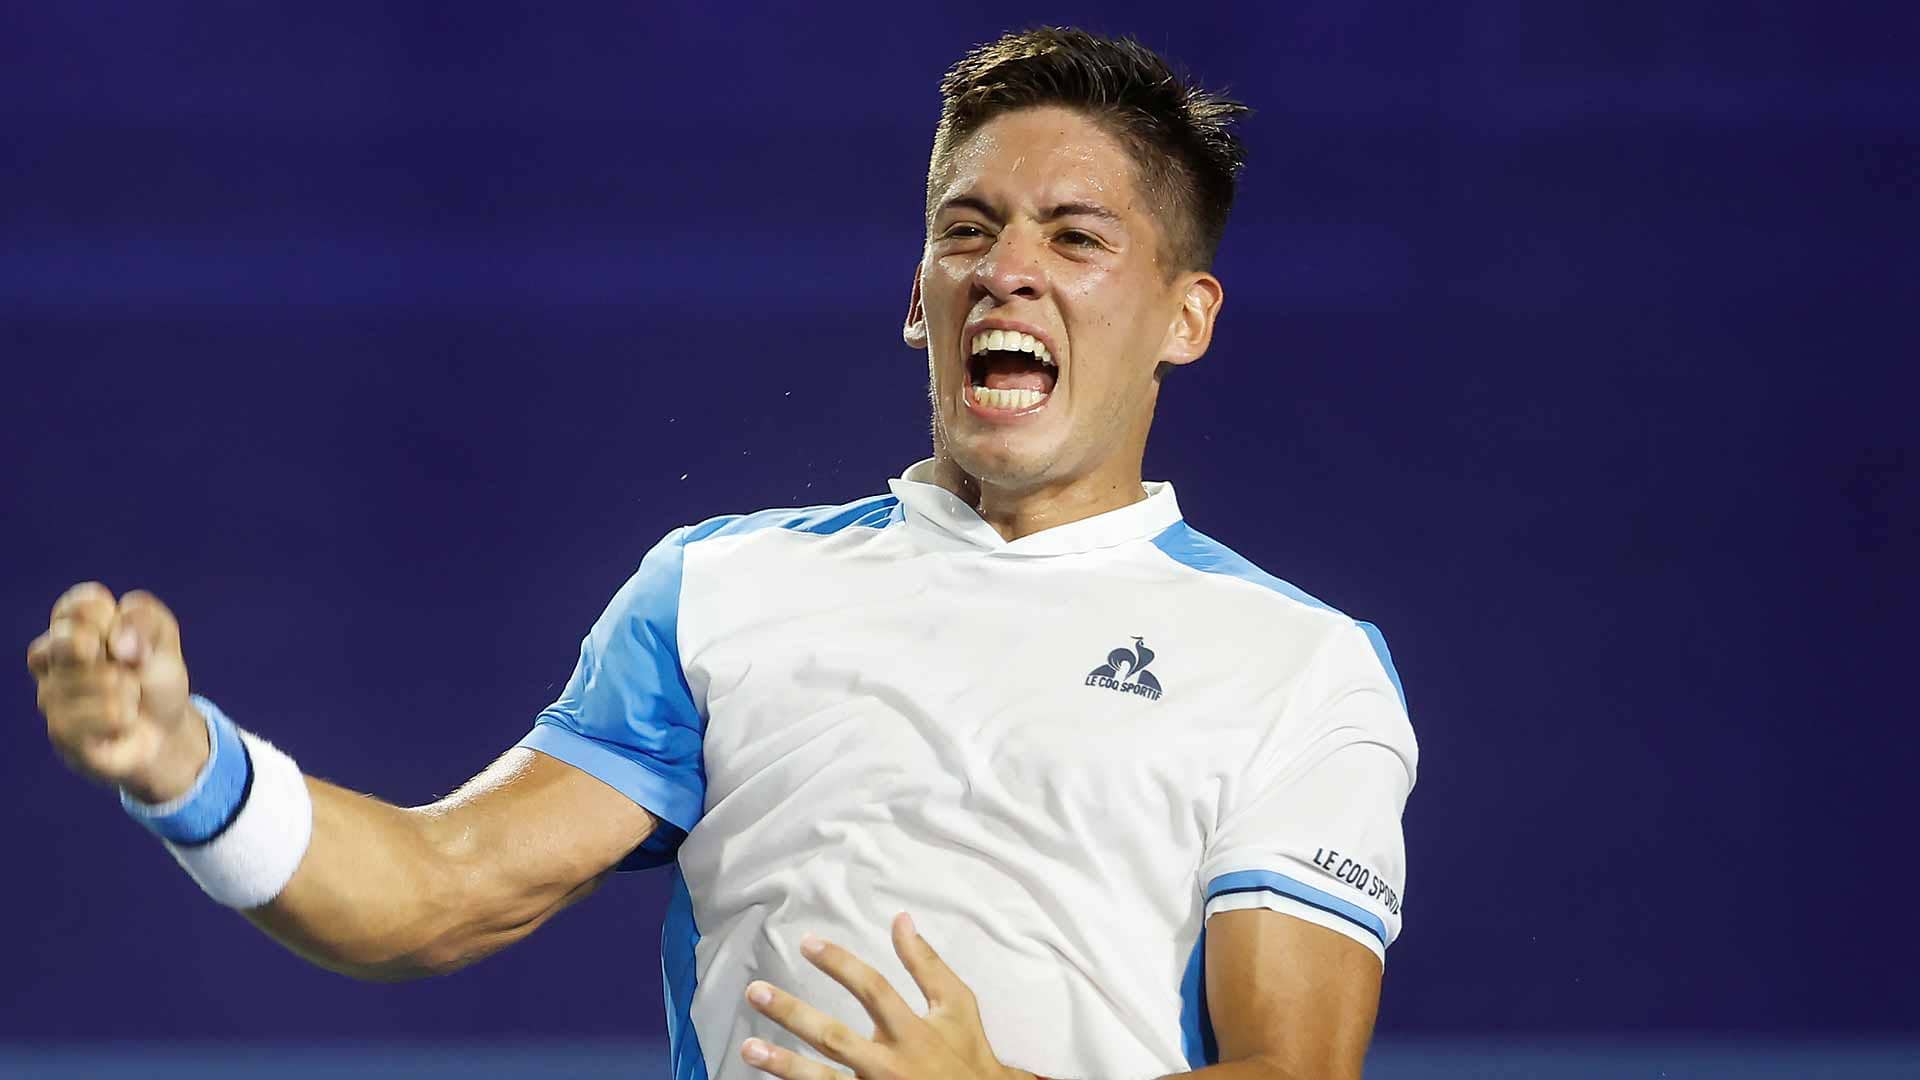 Sebastian Baez rejoices after sealing his three hour, 19-minute win over Borna Coric to reach the Winston-Salem Open final.